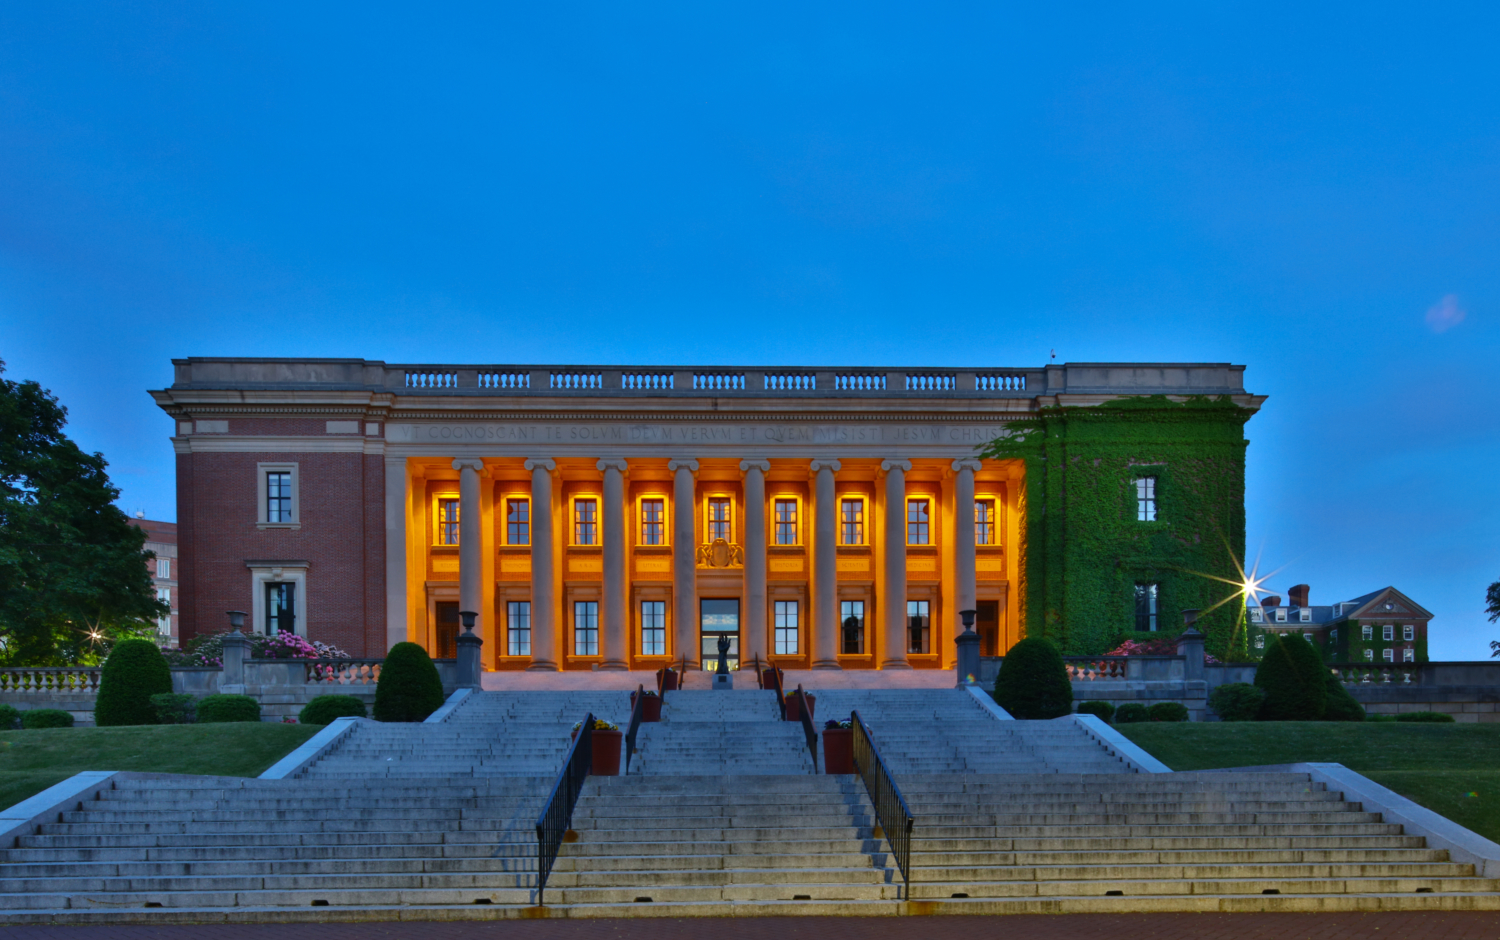 a college library building from the bottom of a large staircase, at dusk